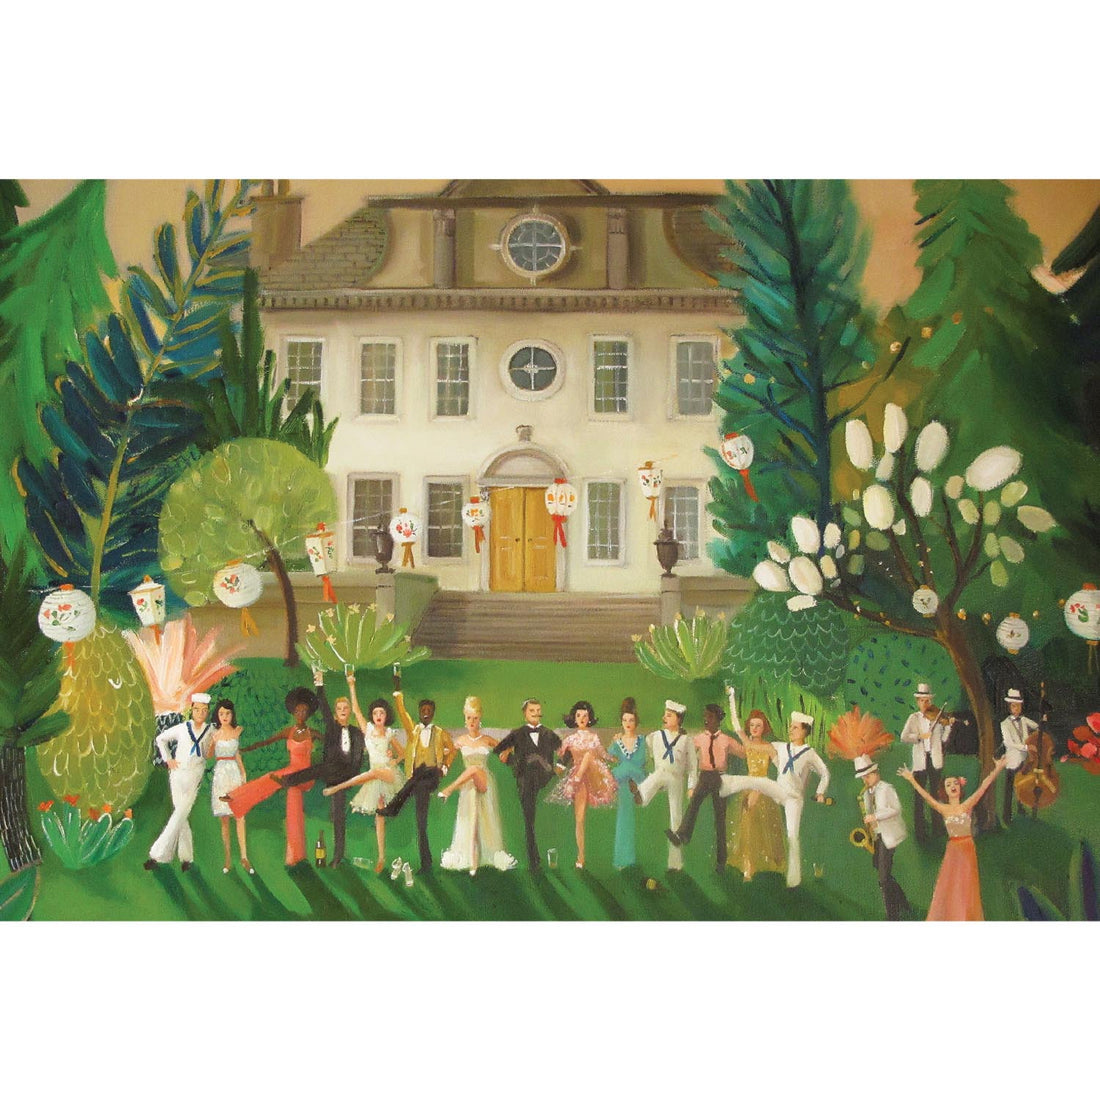 A beautiful illustration by Janet Hill featuring a row of partygoers in vintage clothes kicking a leg up on the lawn of a lush estate, with party lanterns and a jazz band bringing the celebration to life.